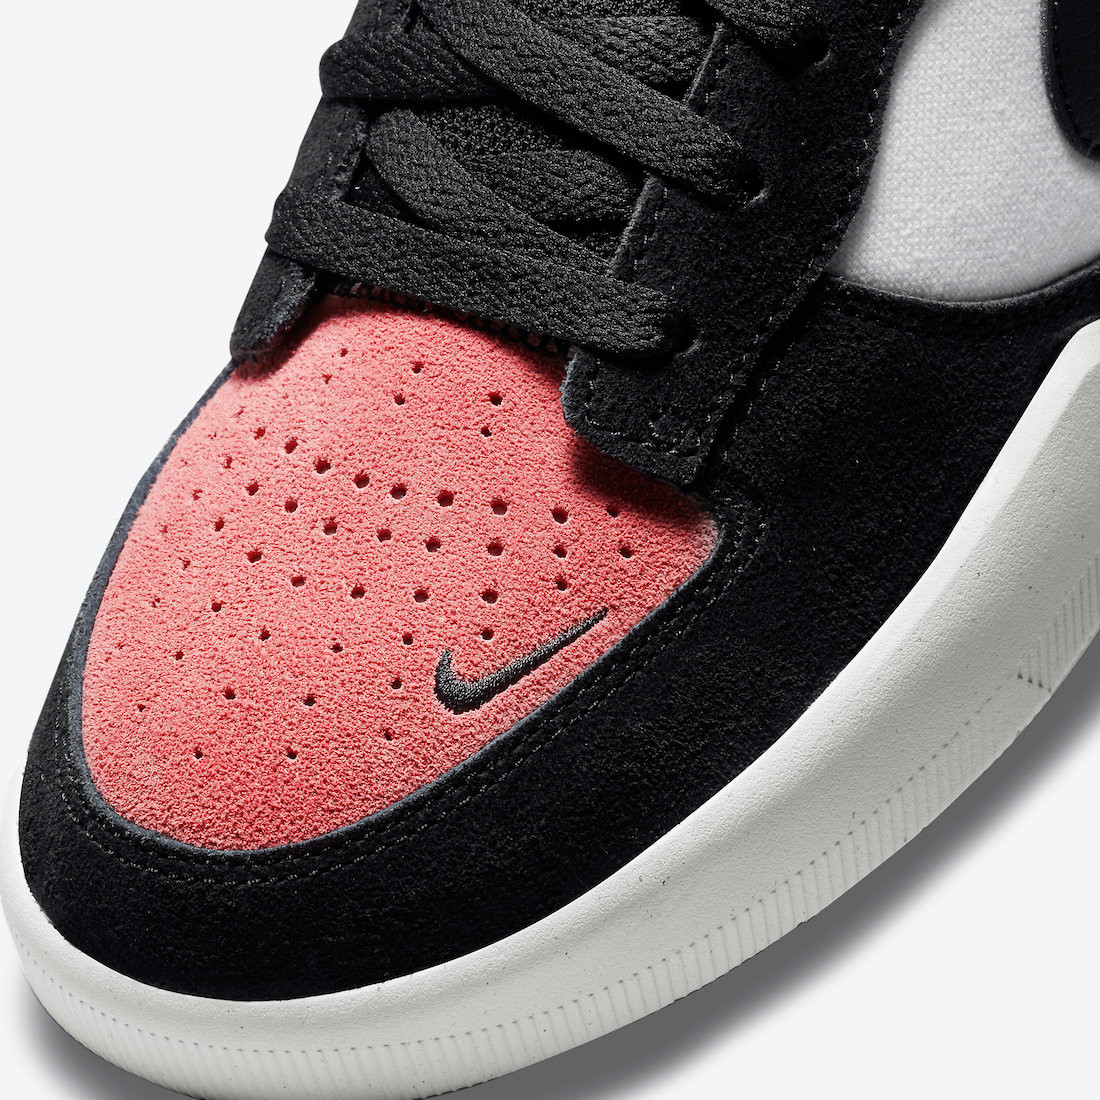 Shelter low-top sneakers - Nike SB Force Pink Salt White Black Wendey Shoes CZ2959 - 600 MultiscaleconsultingShops